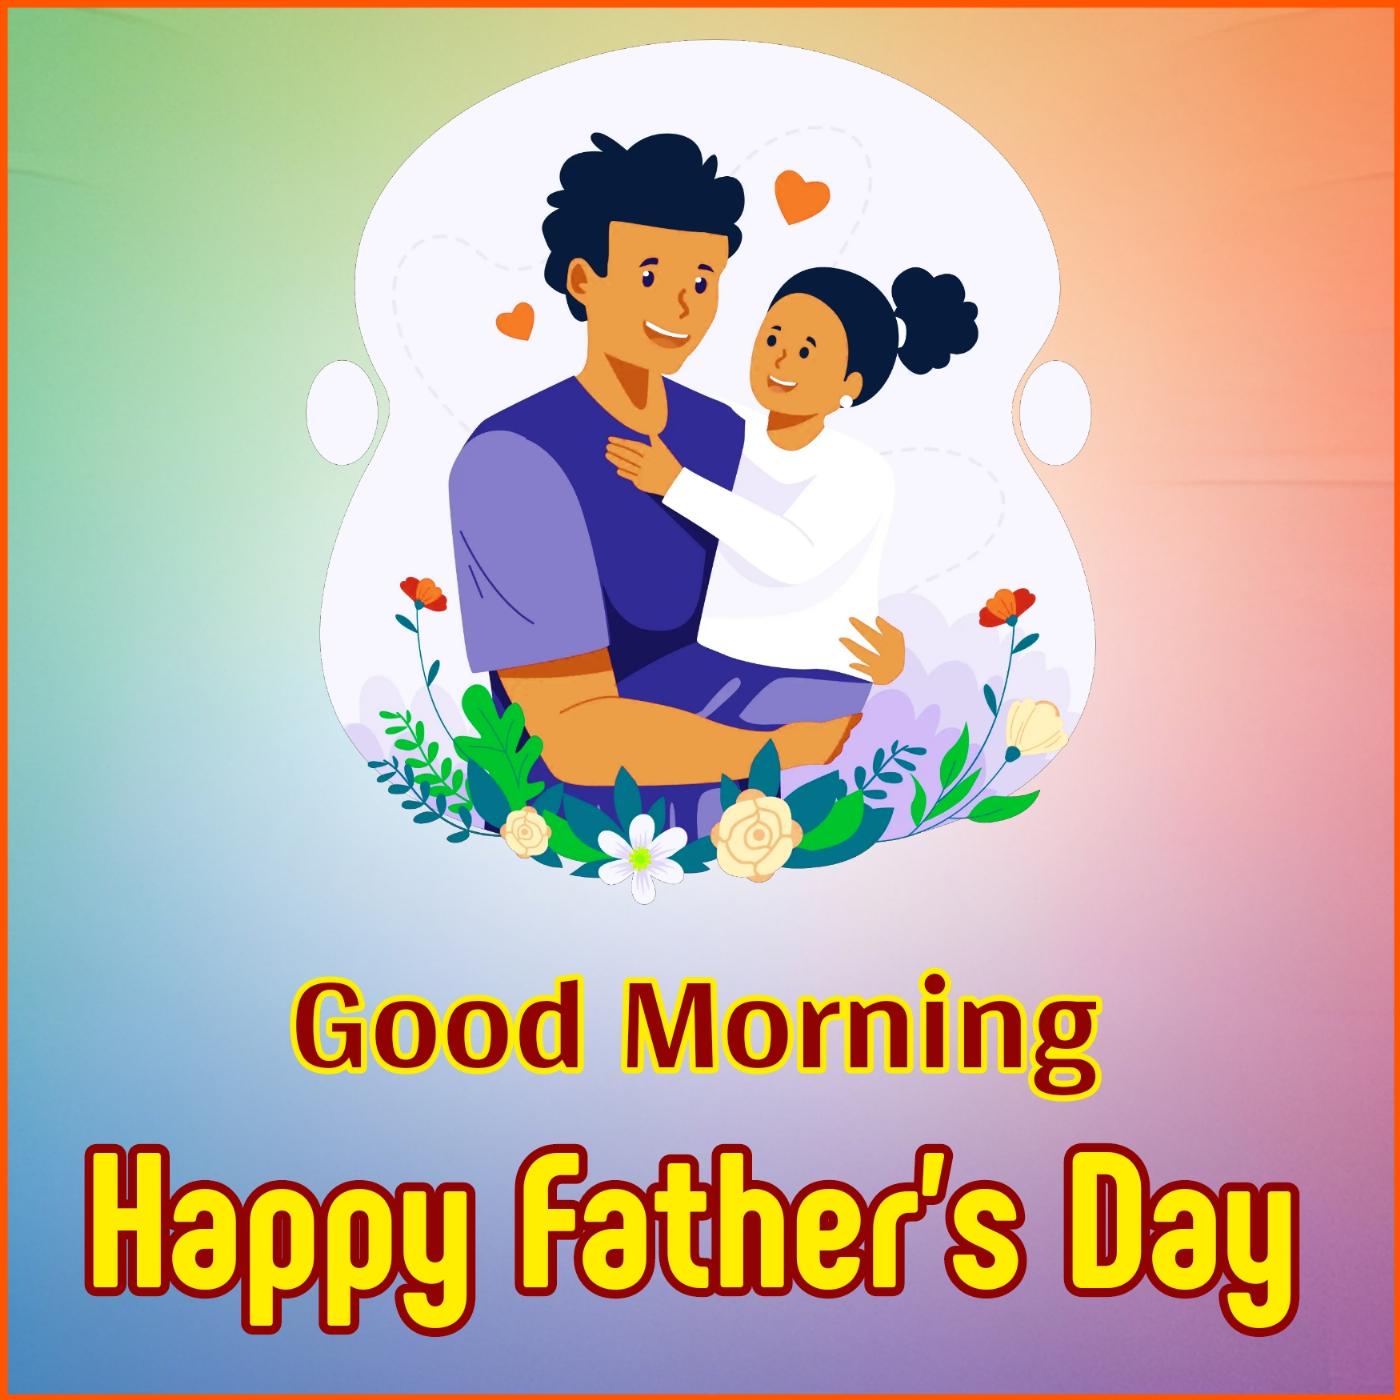 Good Morning Happy Father's Day Images